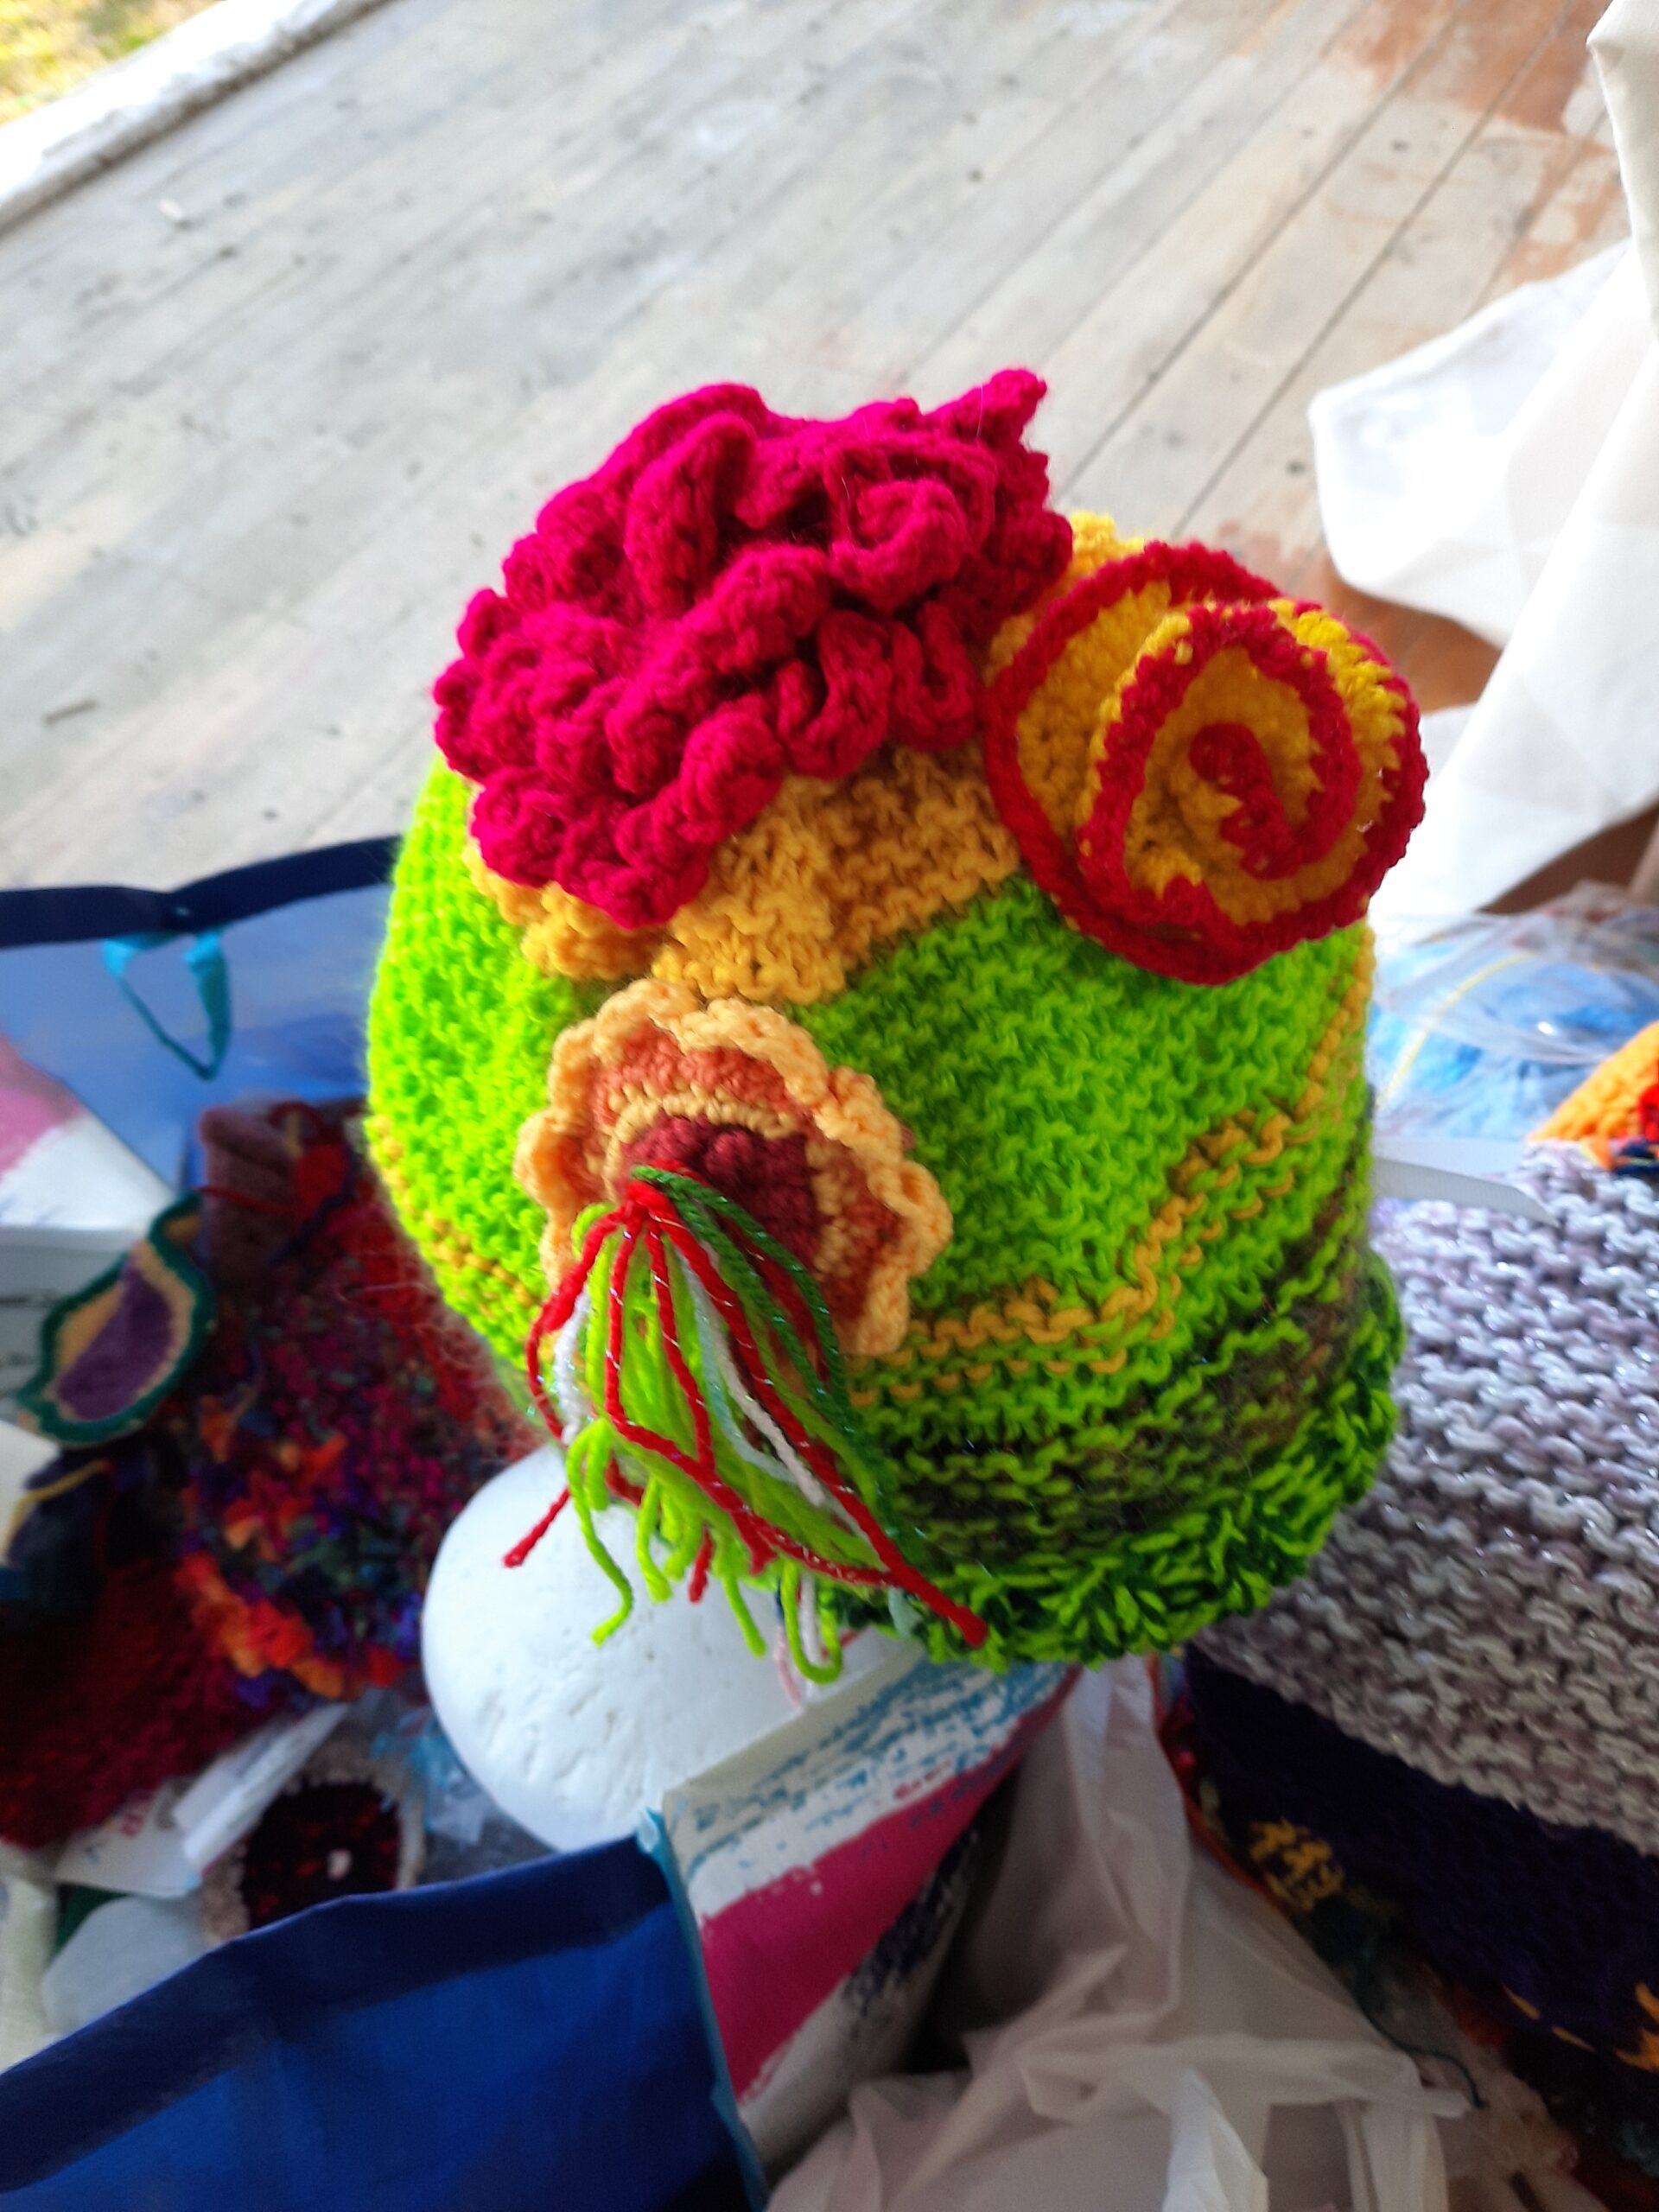 Top view of ‘Floral Bounty’ crafted by Narrabri resident Noeline Kiss.